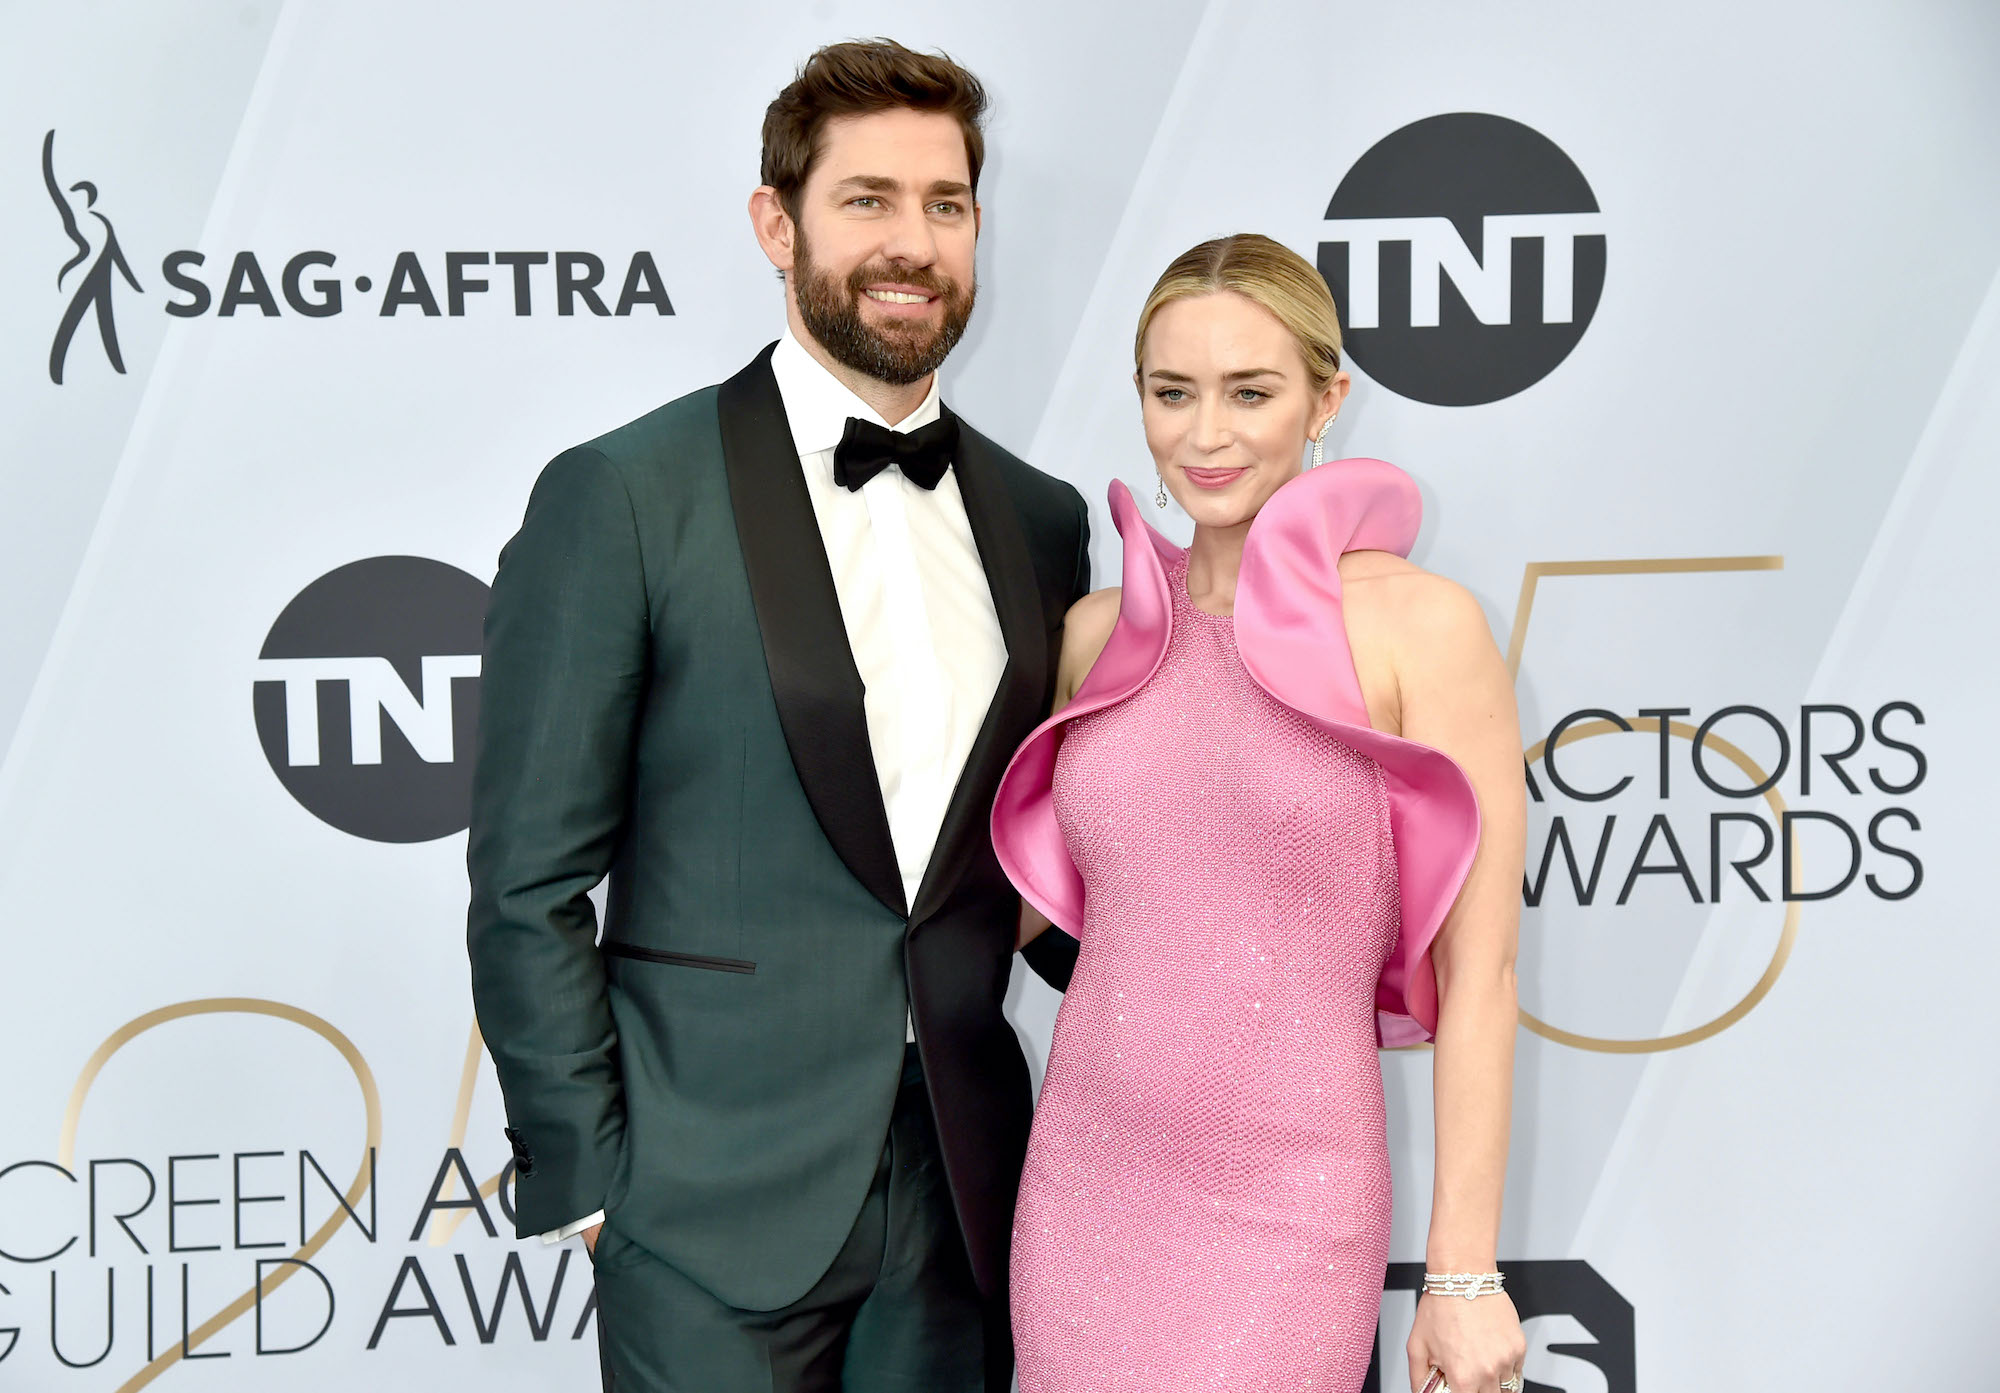 (L-R) John Krasinski and Emily Blunt smiling in front of a white background